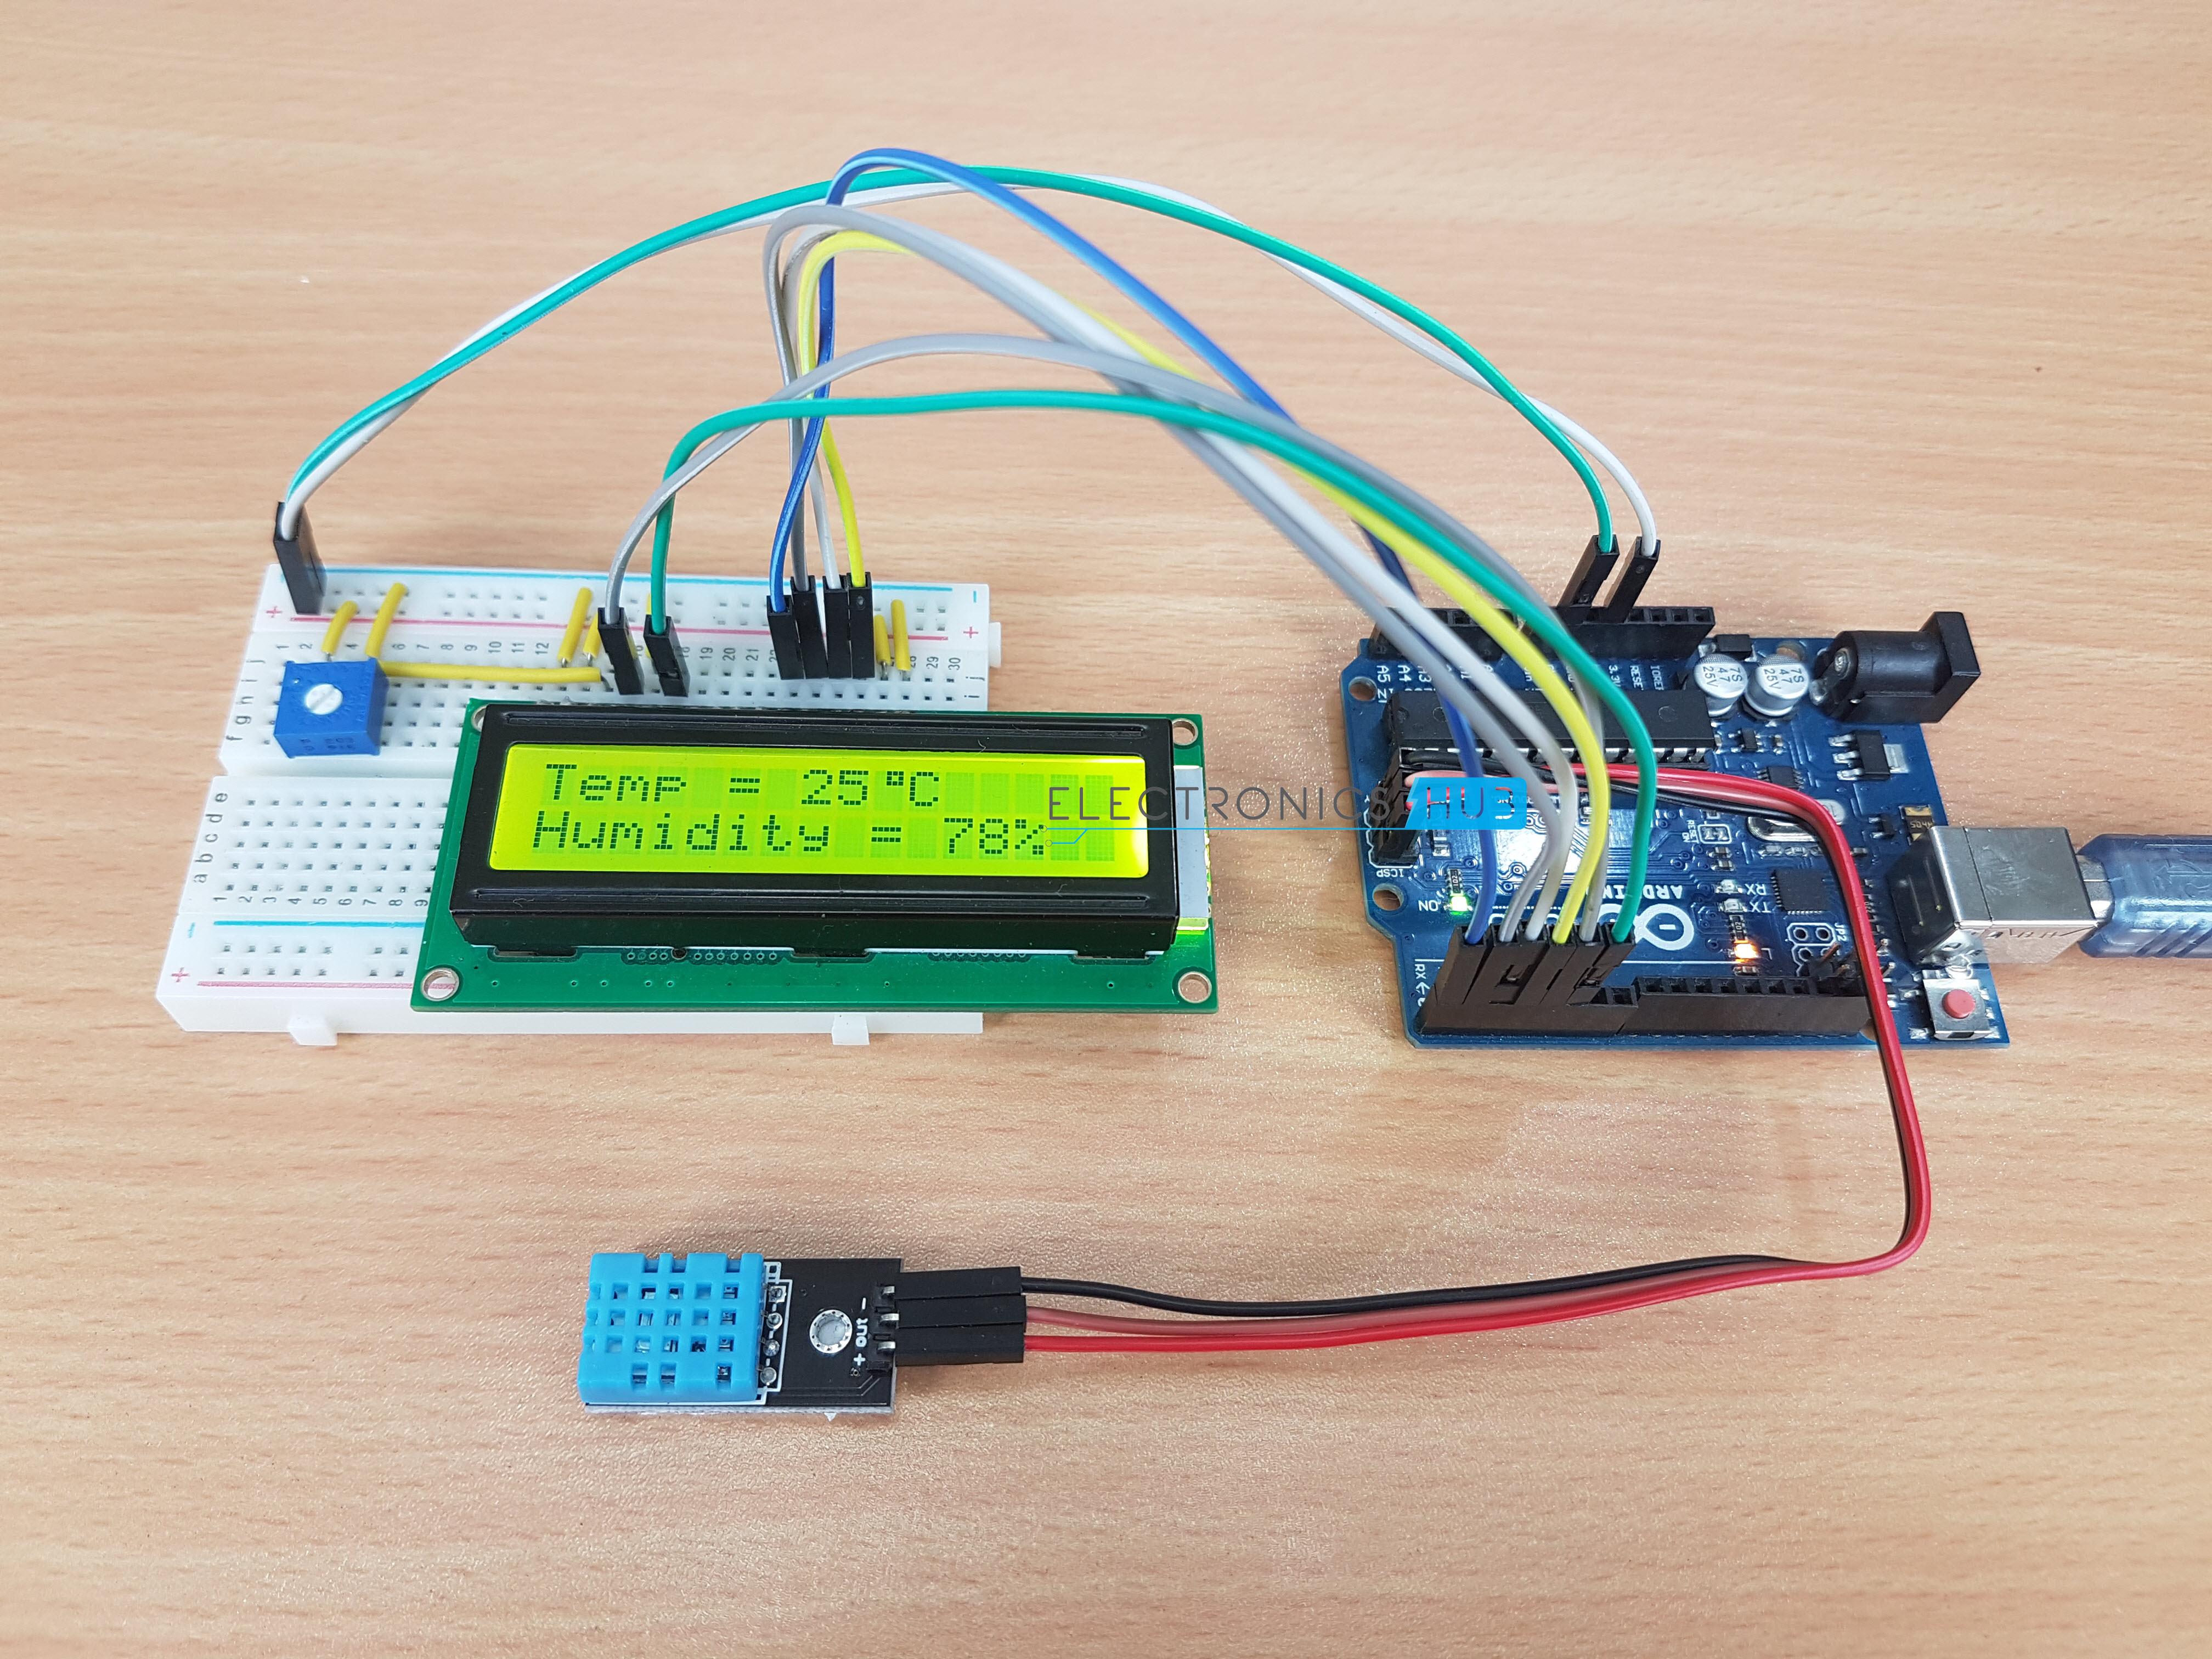 DHT11 Humidity and Temperature Sensor on Arduino with LCD